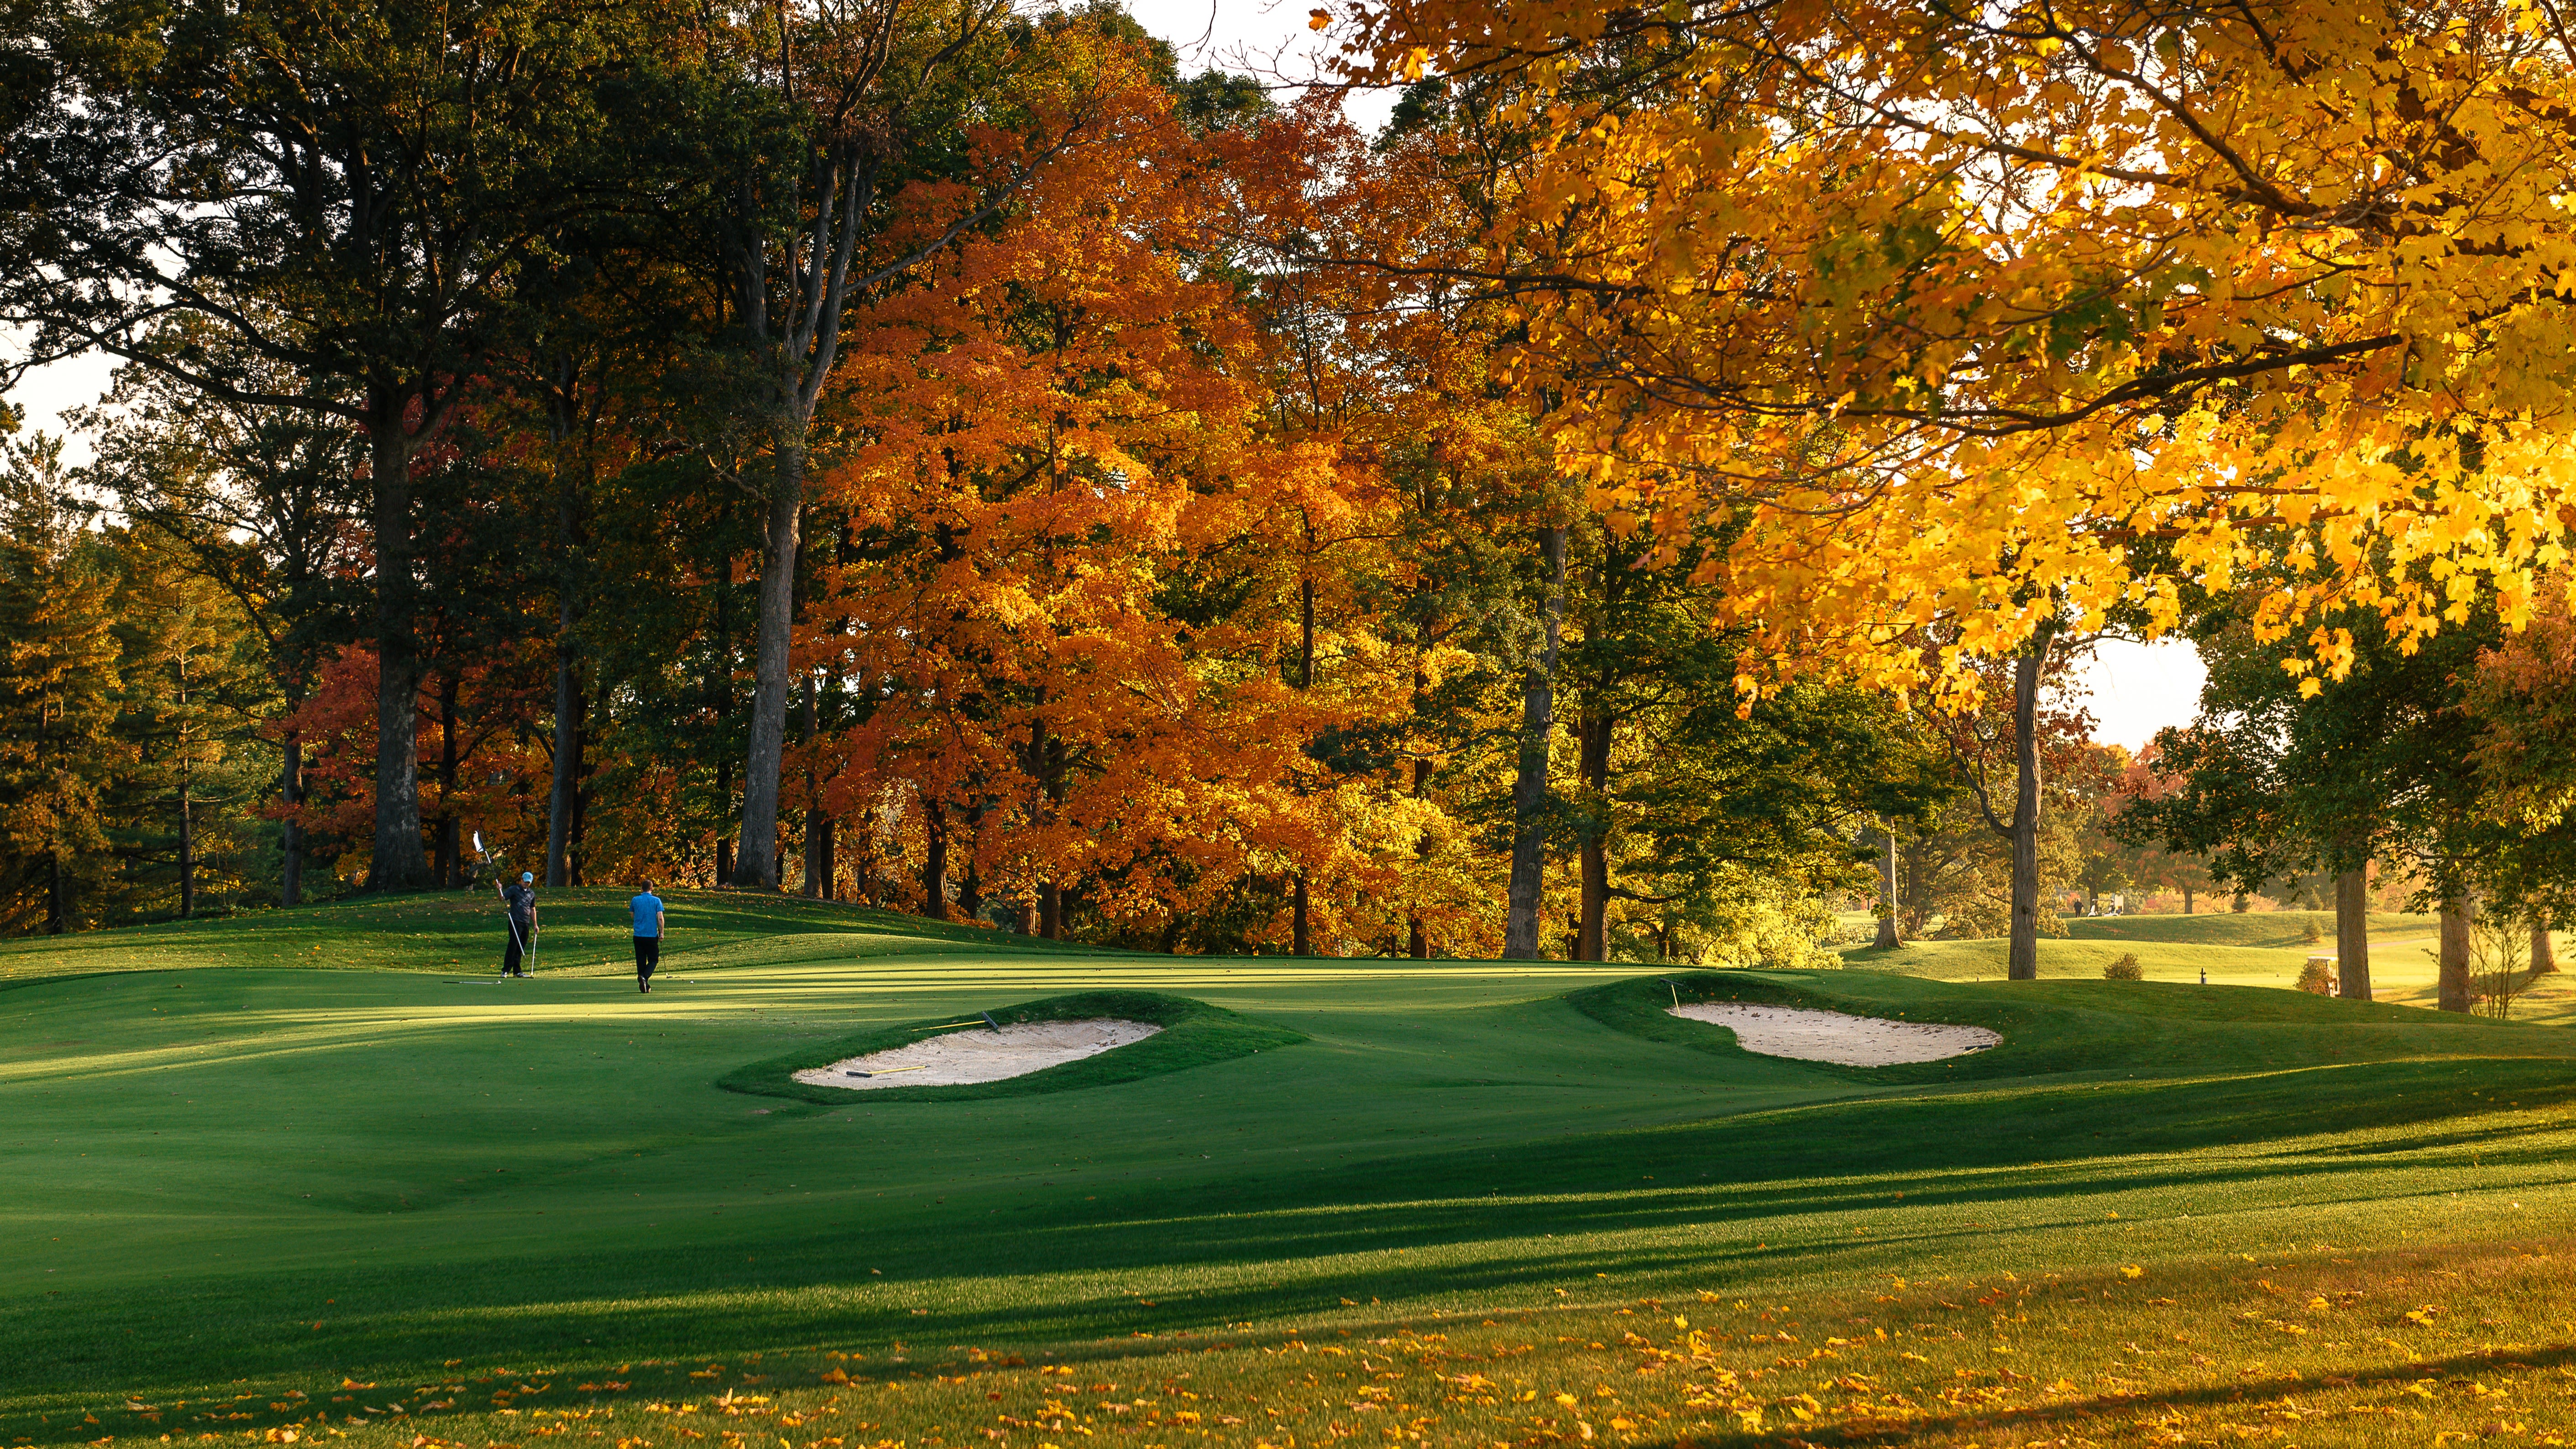 The Birck Boilermaker Golf Complex courses at Purdue University will serve as the Spring National Championship host.